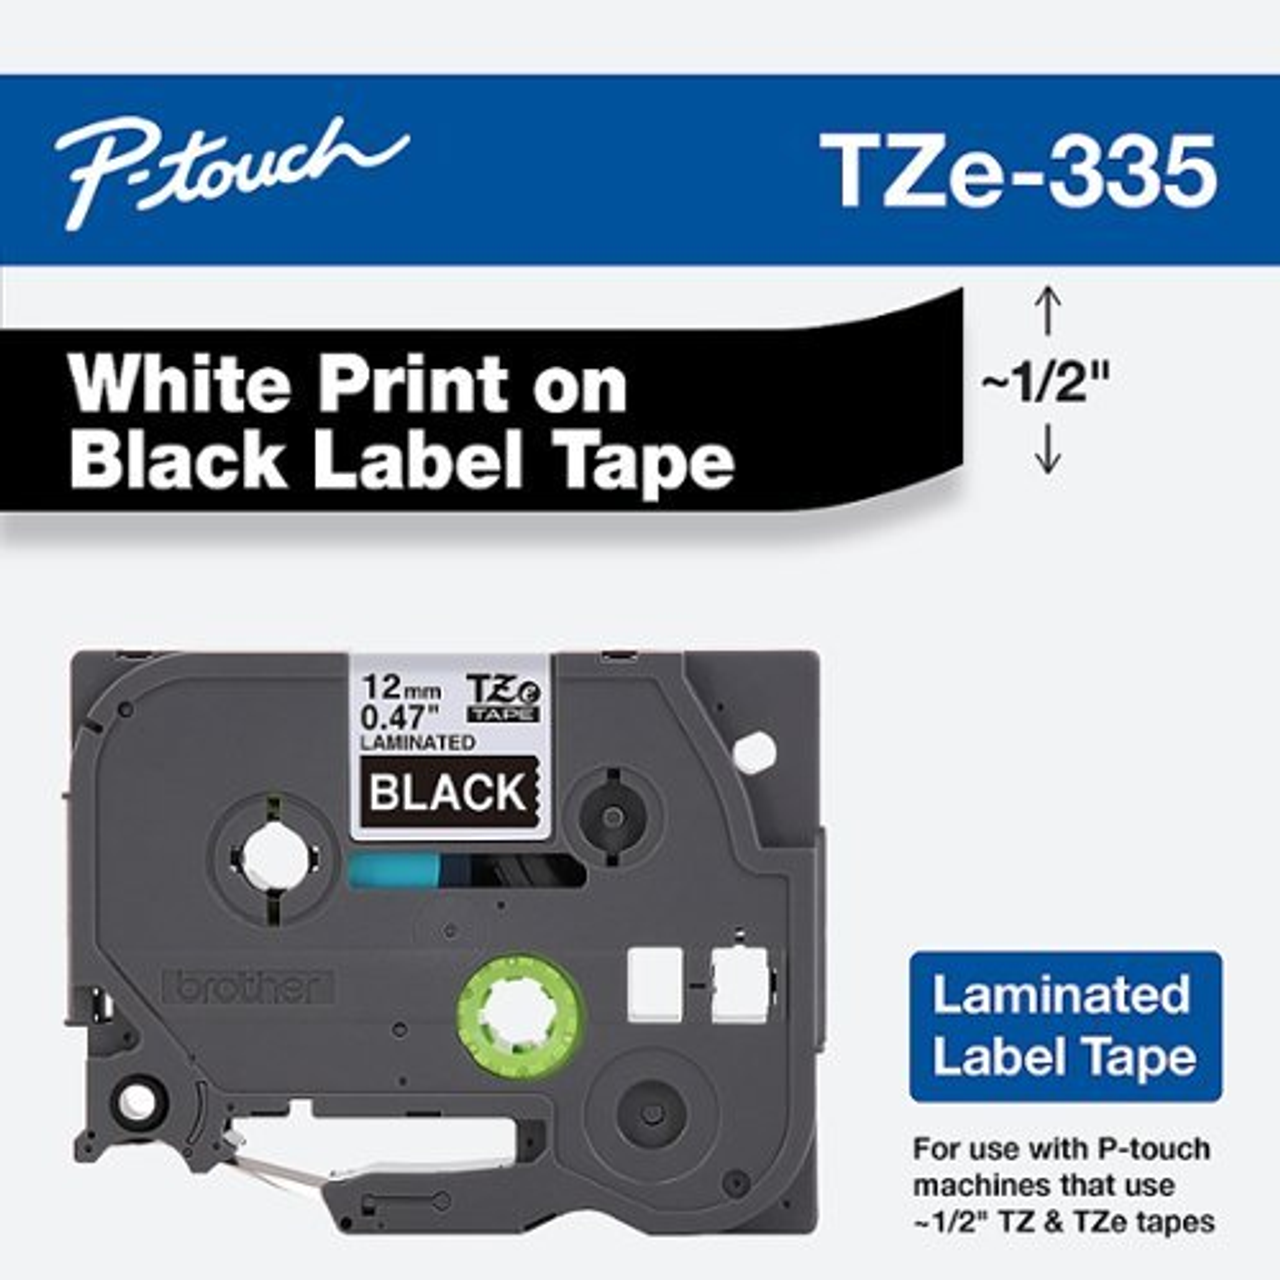 Brother - P-touch TZE-335 ~3/4" (0.70") x 8m (26.2’) White on Black Laminated Label Tape - White on Black